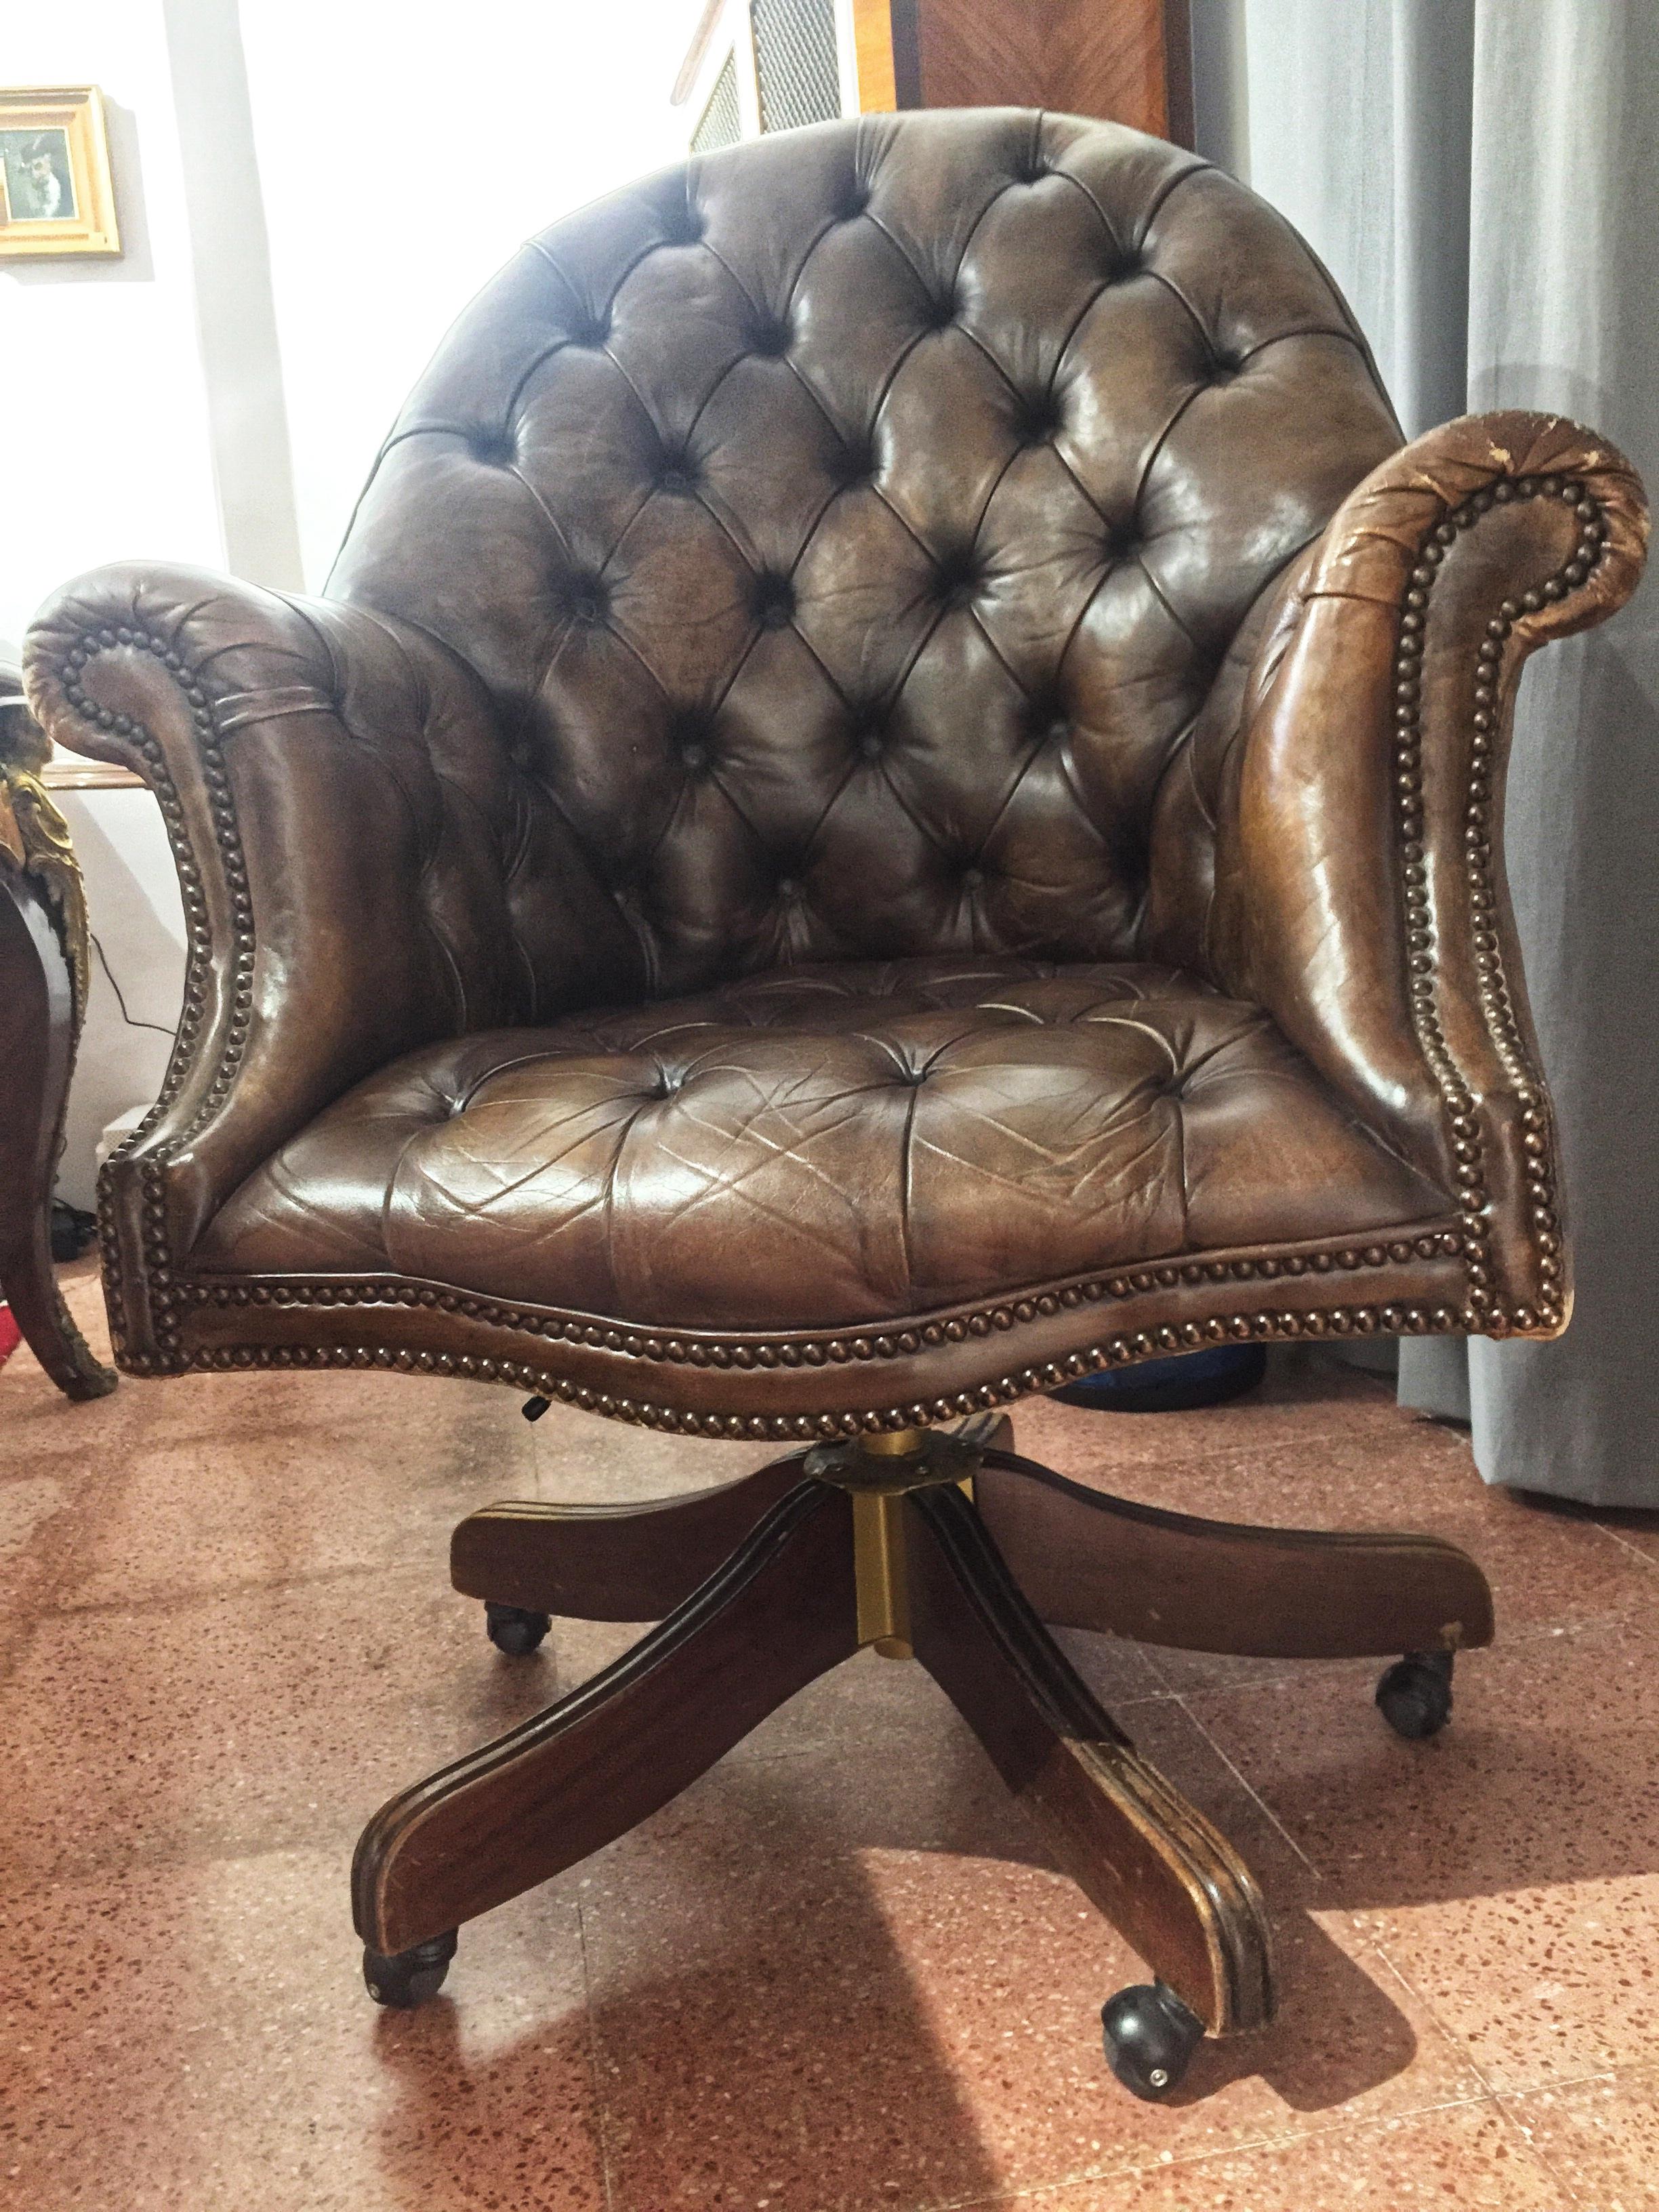 Beautiful English armchair, leather with wheels.

Classic Chester leather armchair from the 1970s. High quality, very comfortable and with wheels, ideal for a large desk or a living room.